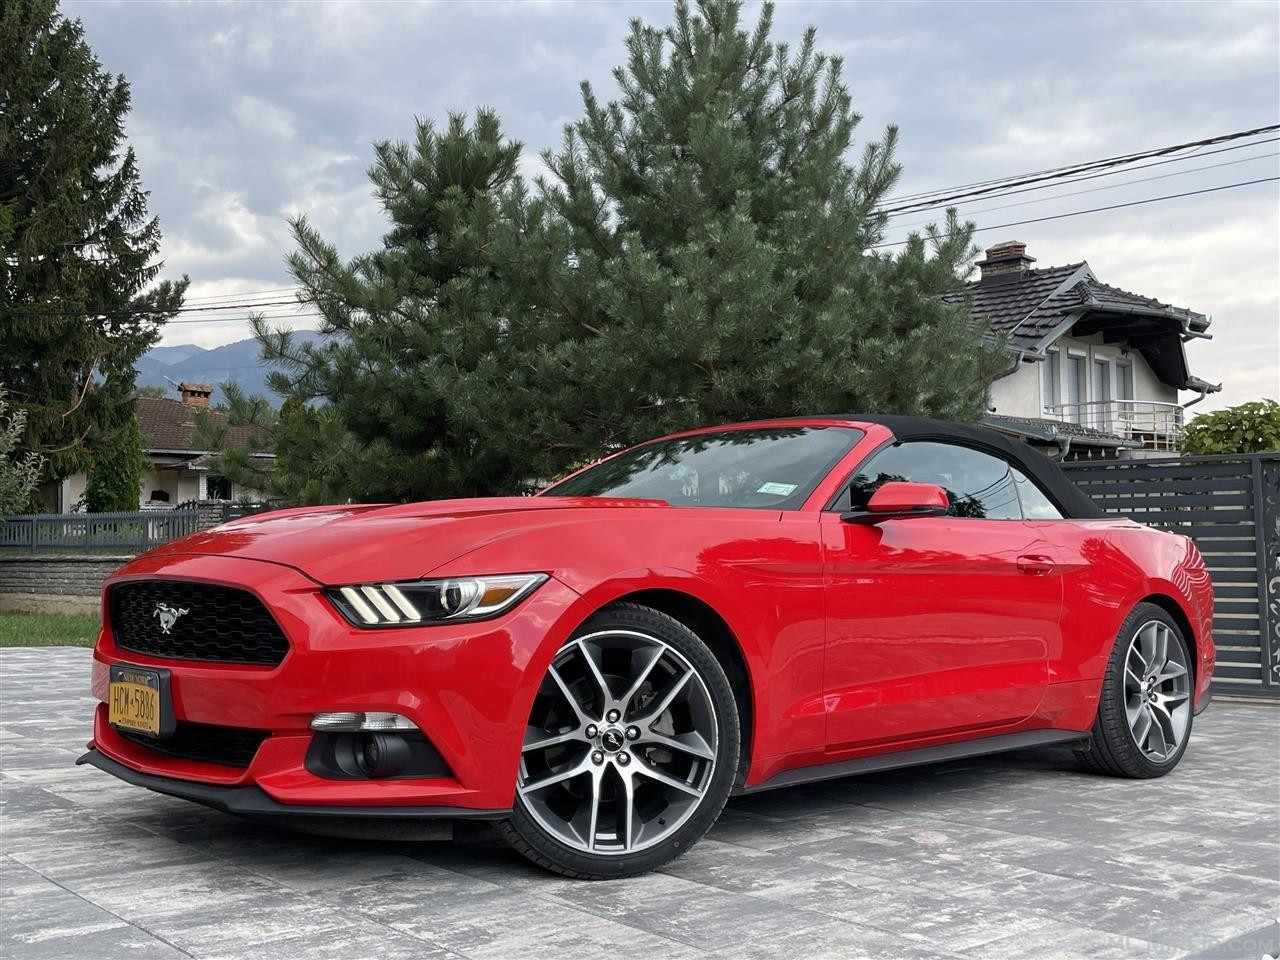 FORD MUSTANG 2.3 317PS CONVERTIBLE ECO BOOST CABRIOLET